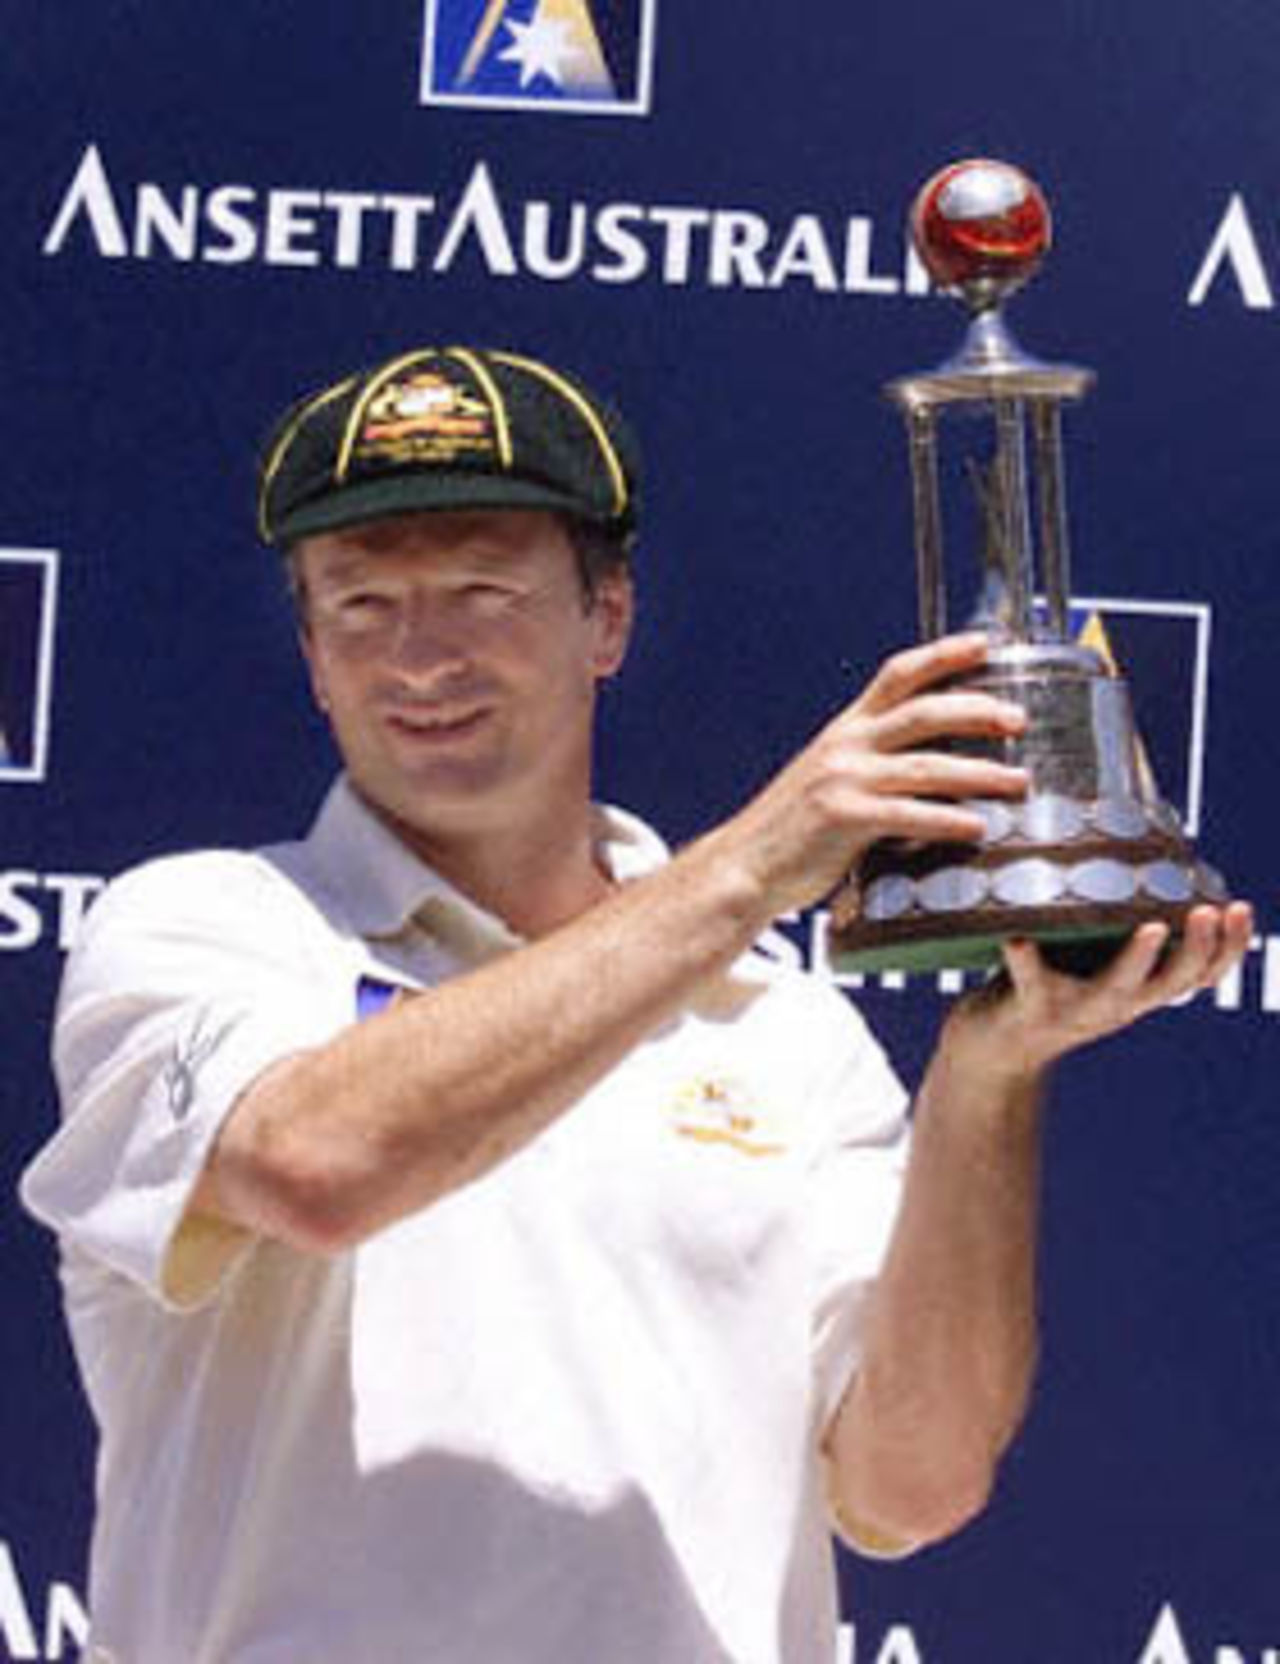 Australian captain Steve Waugh holds the Sir Frank Worrell cup after Australia won the Federation test at the Sydney Cricket ground 06 January 2001. Australia won the five day test against the West Indies with 7 wickets in hand.